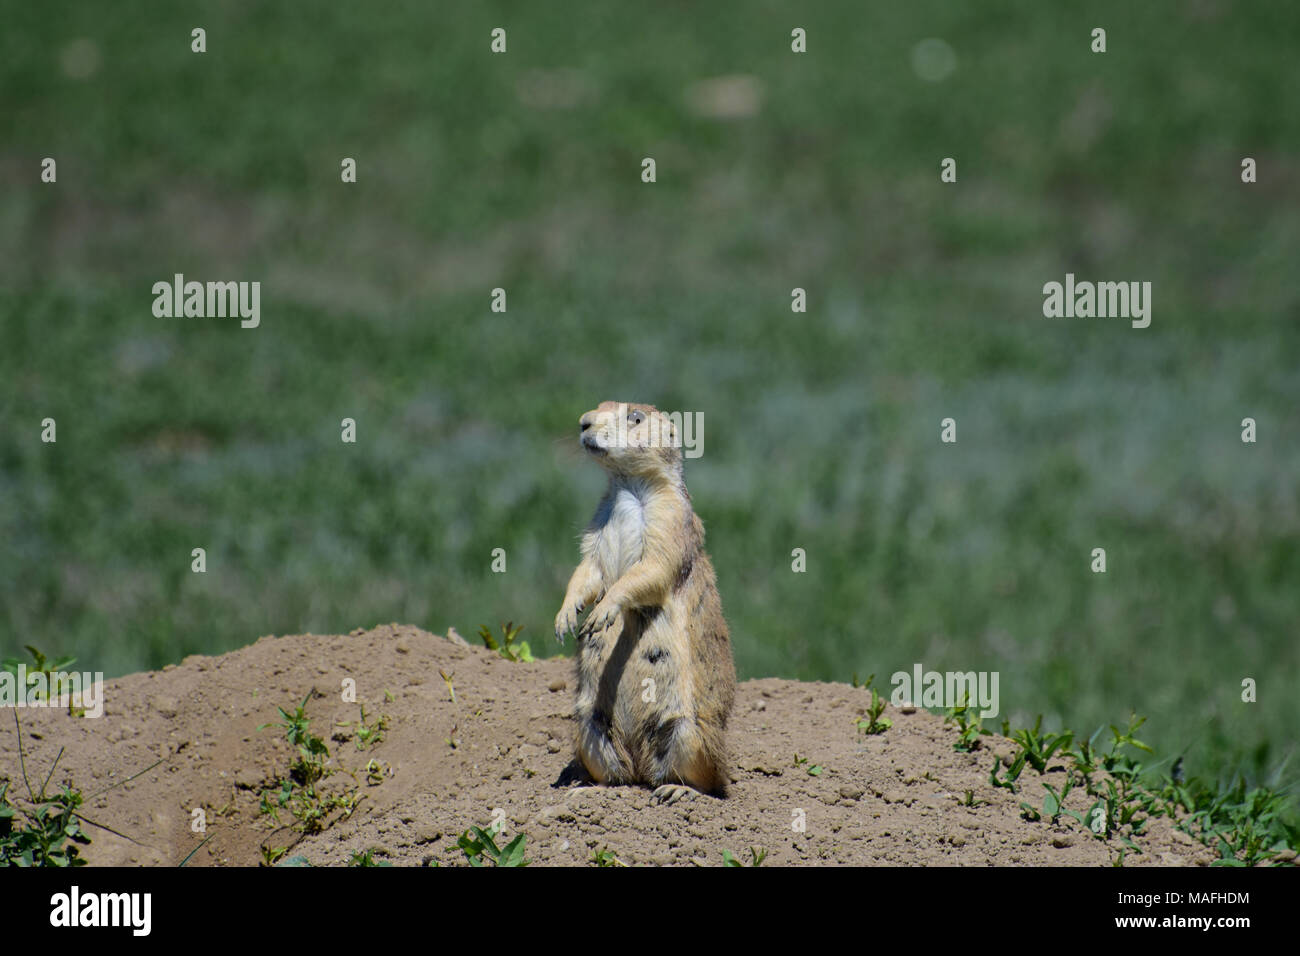 Wild prairie dog on alert at the entrance of its burrow Stock Photo